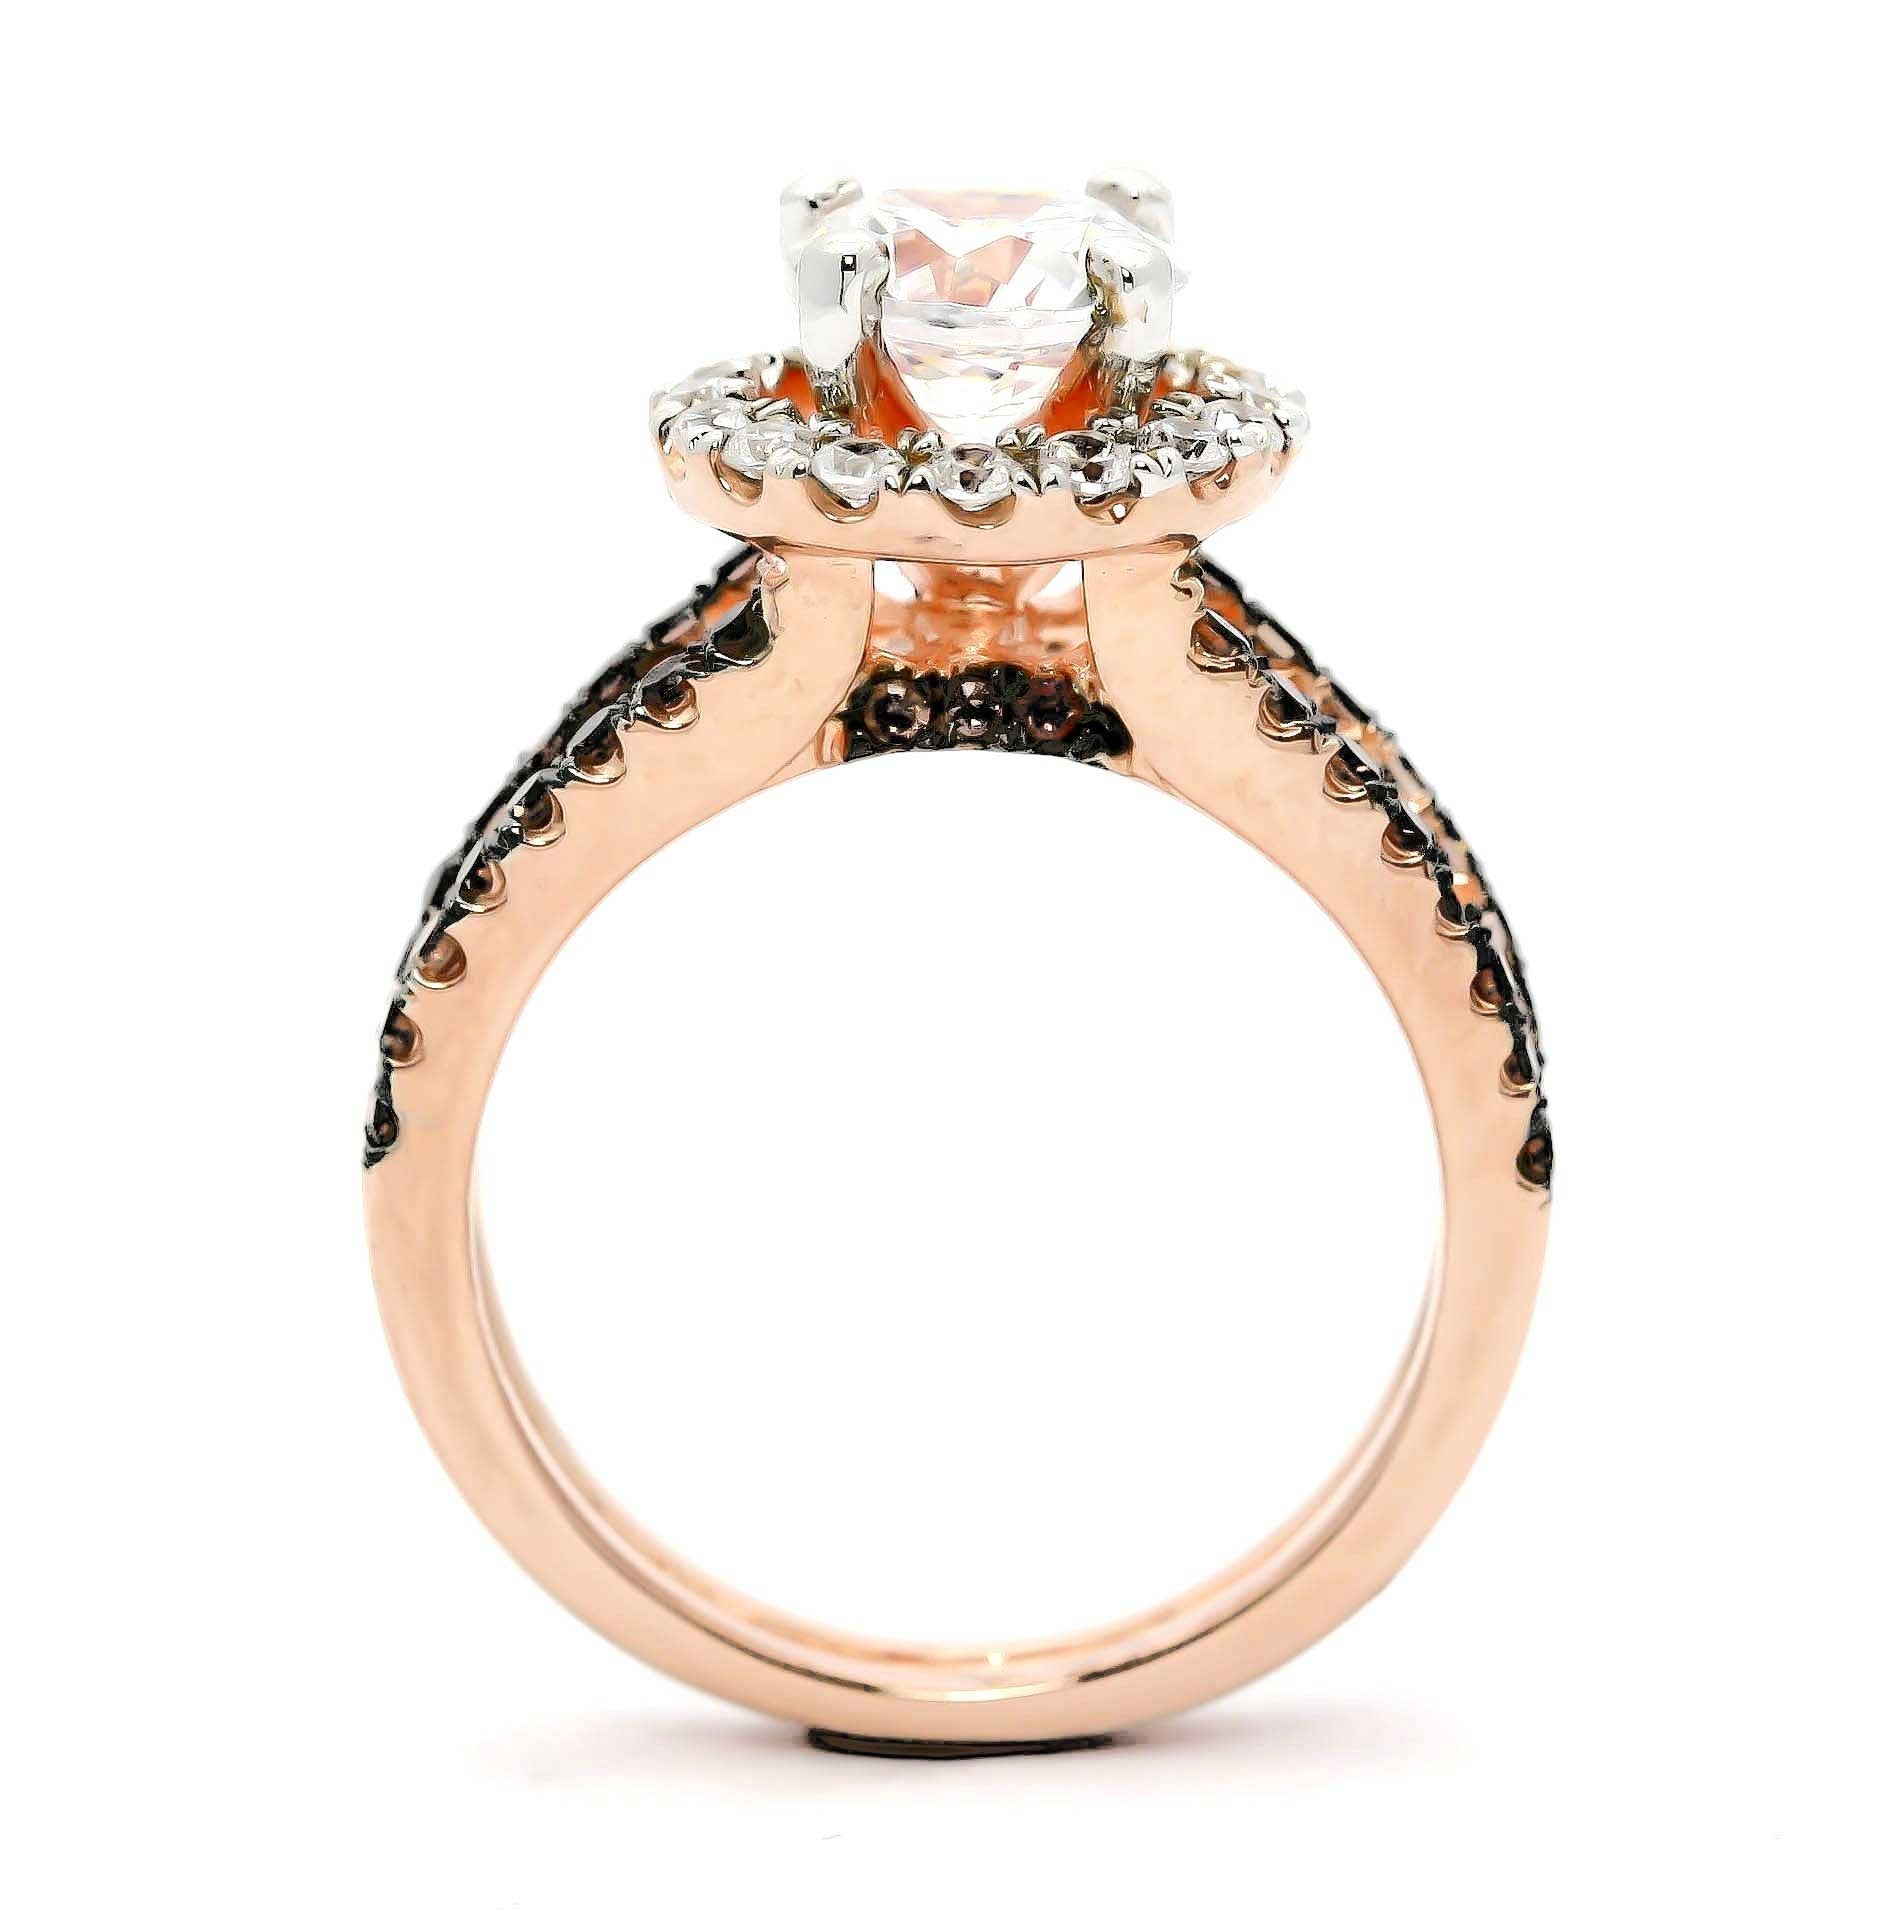 1 Carat Morganite with Black Diamonds, Floating Halo Rose Gold Engagement Ring With 1.02 Carats of White and Black Diamonds, Anniversary Ring - MG94654B